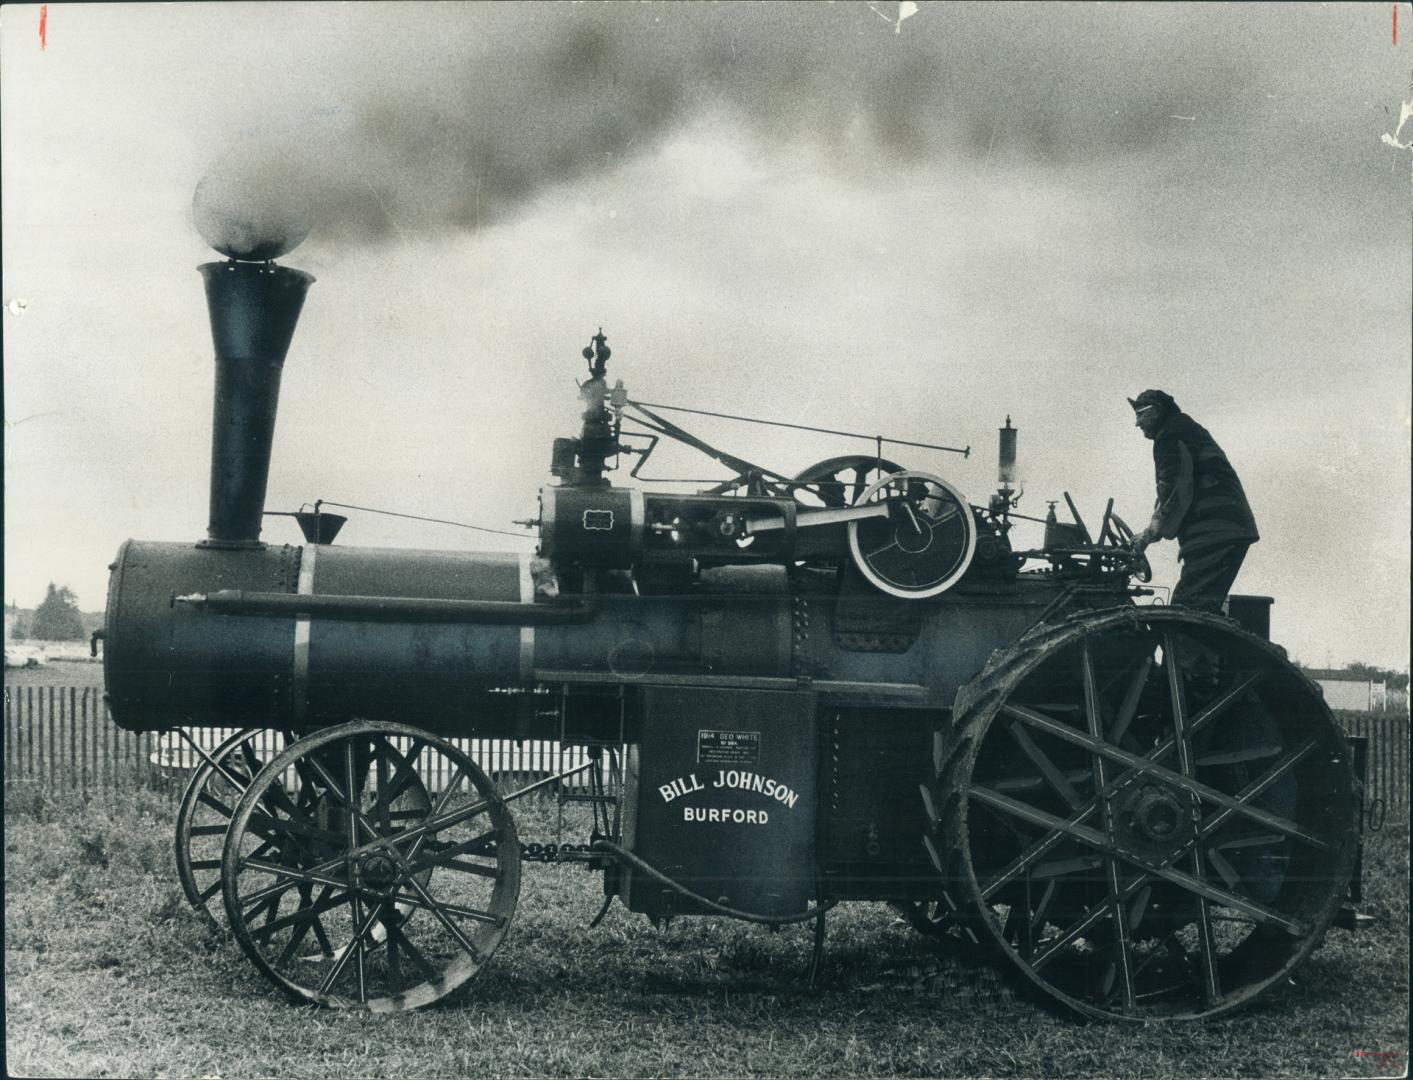 Huge steam engine, a symbol of a long-past era in Canadian agriculture, is only one of the delights for visitors to the world plowing match. [Incomplete]